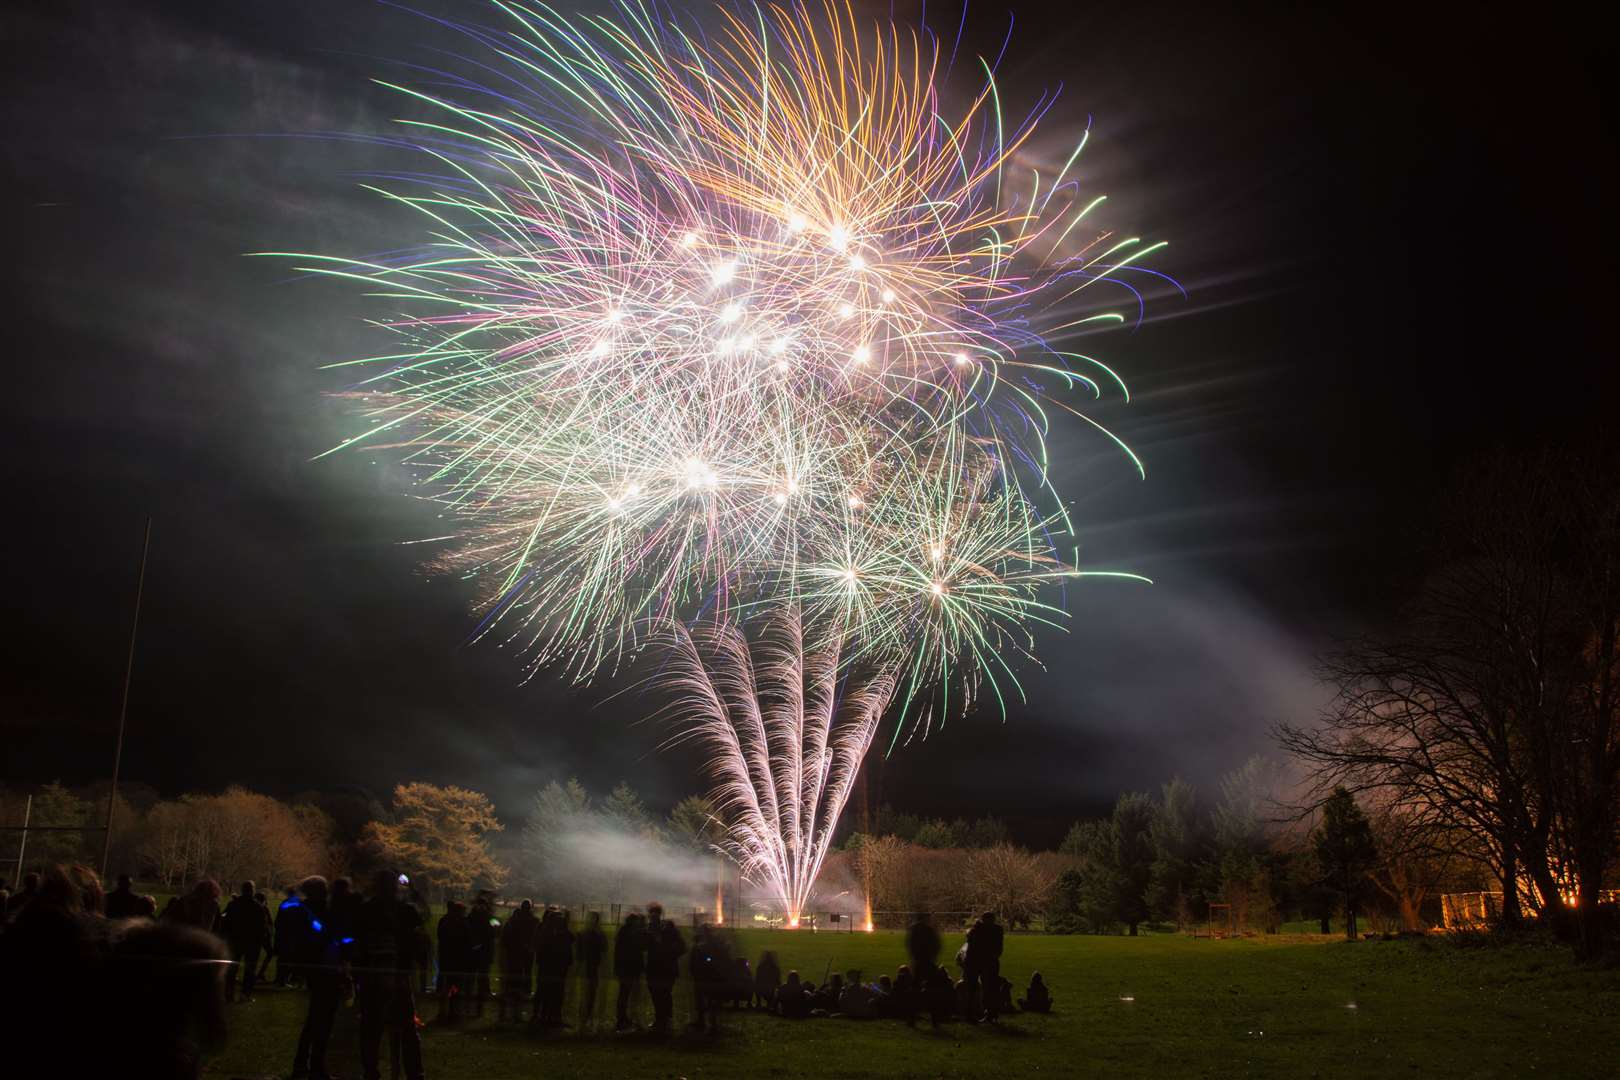 A call has been made by organisers for the public to support the Banff Fireworks Display.